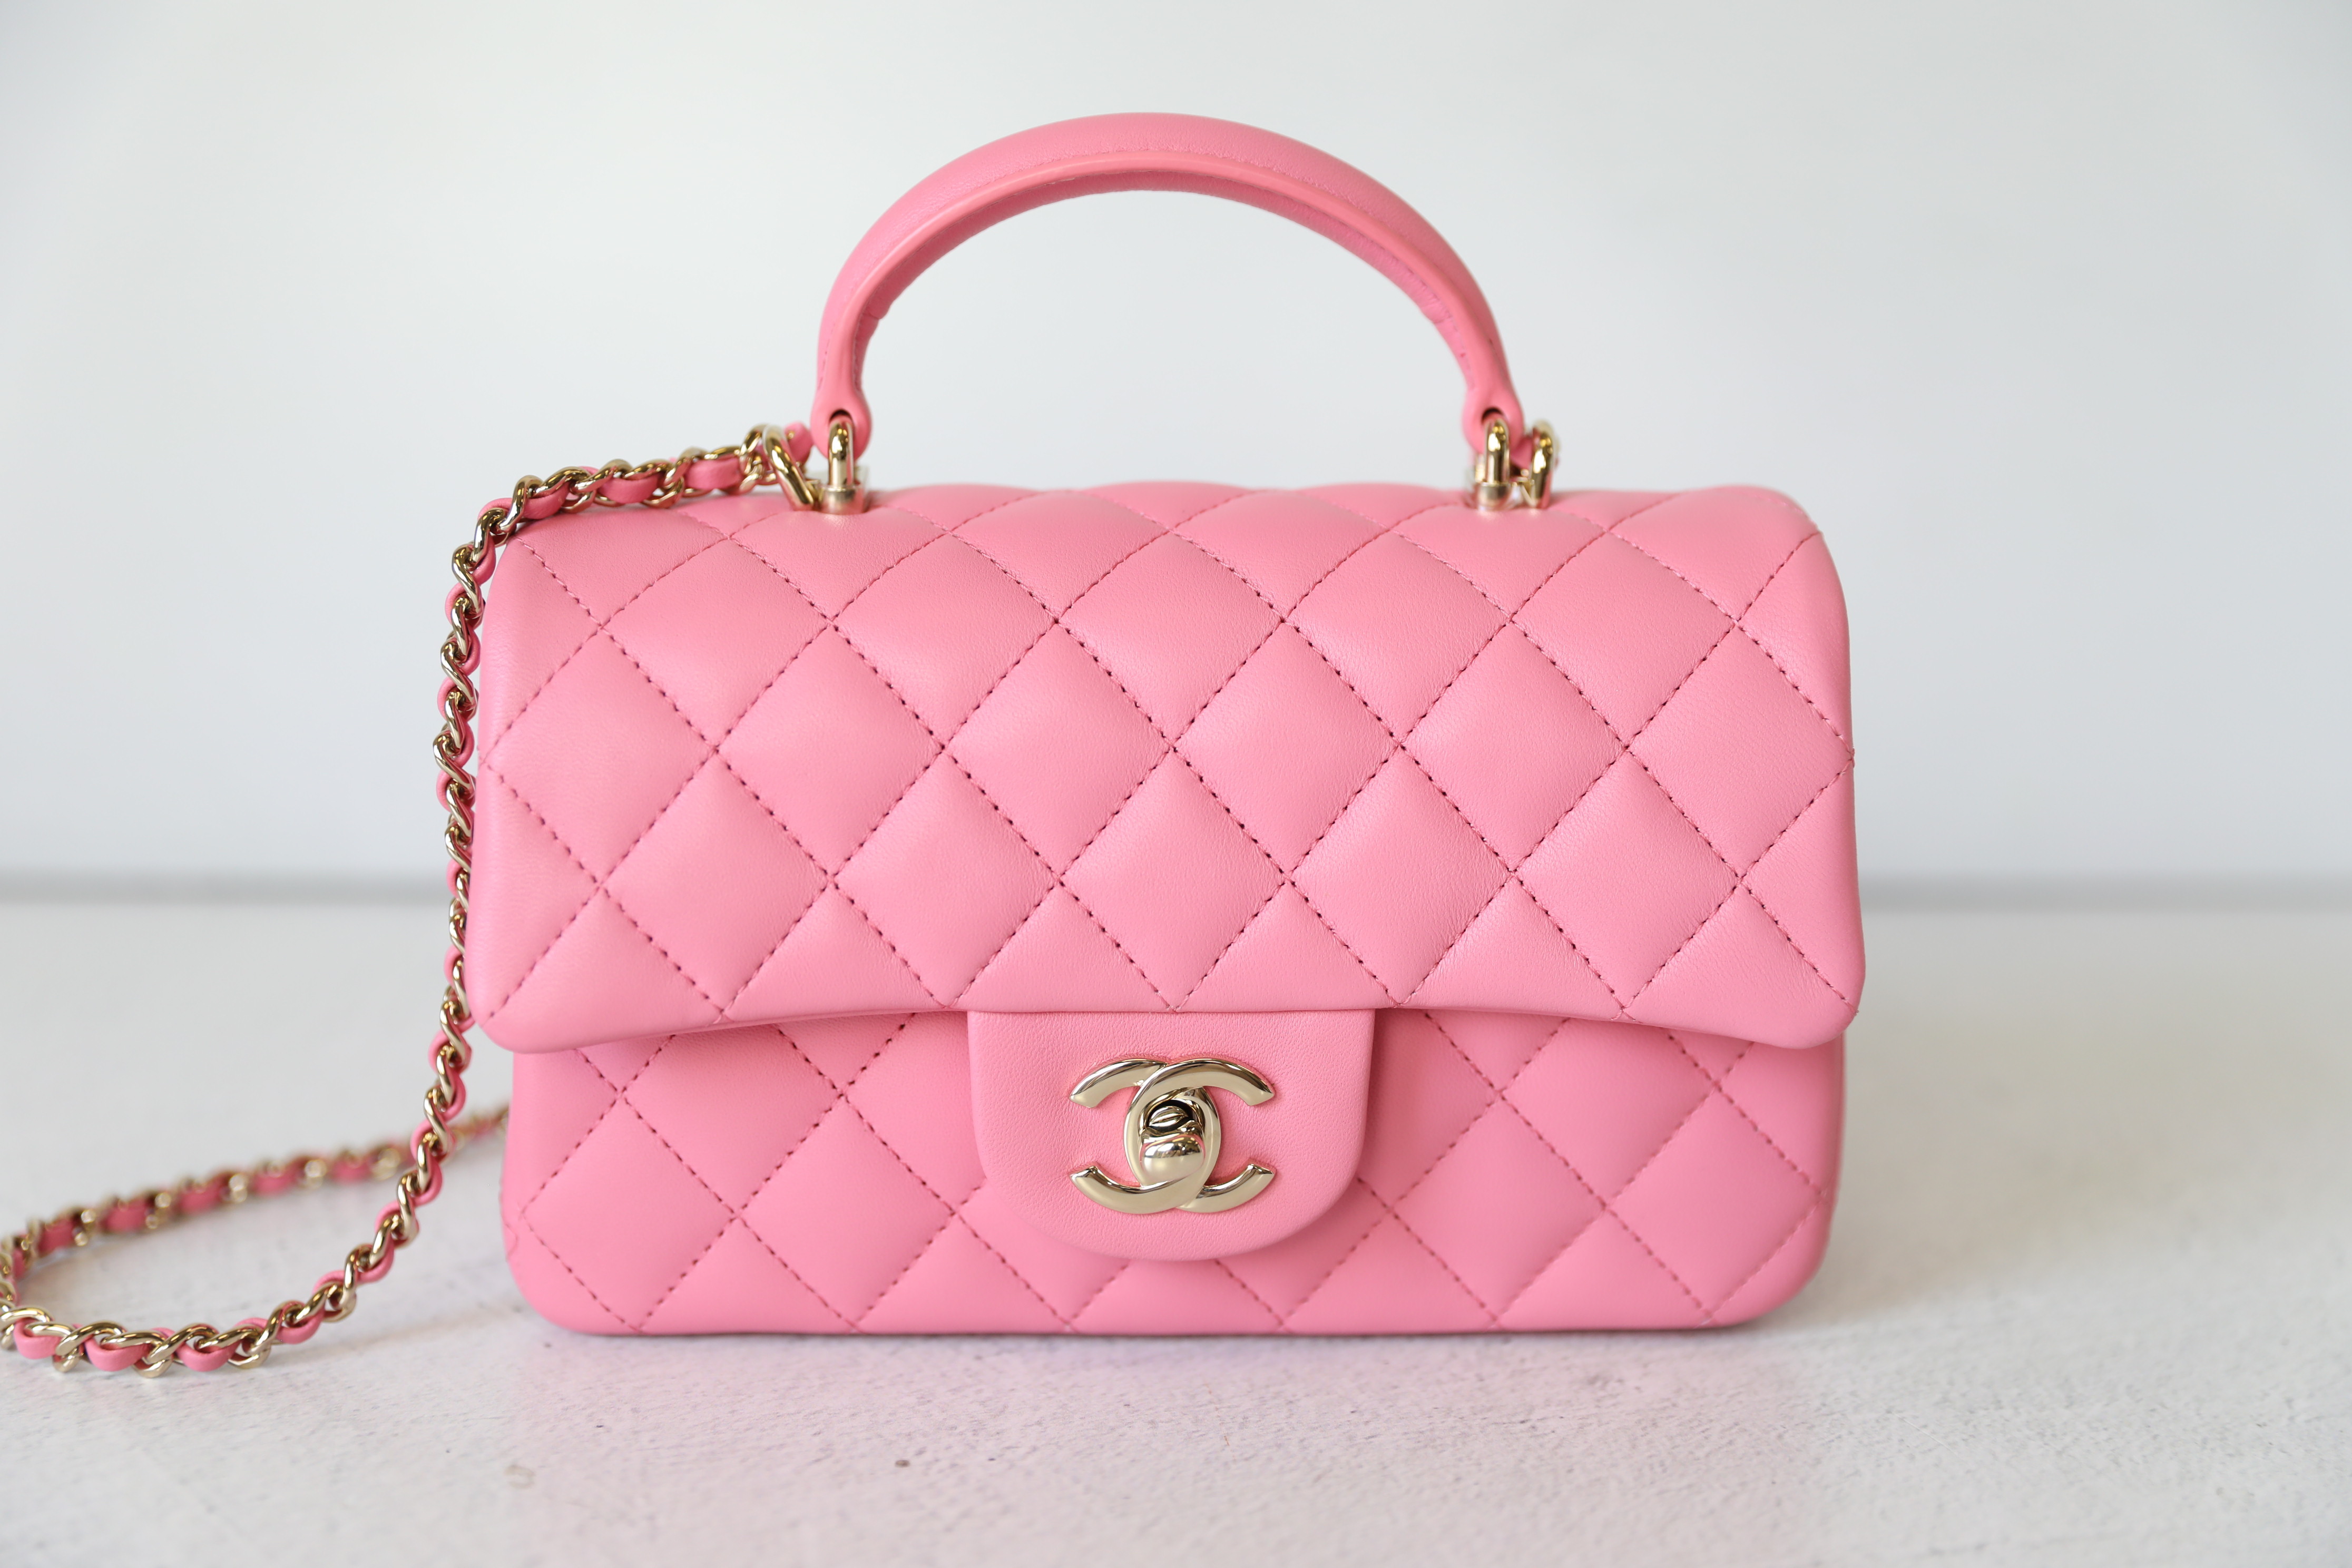 Chanel Mini Rectangular Top Handle, Pink Lambskin with Gold